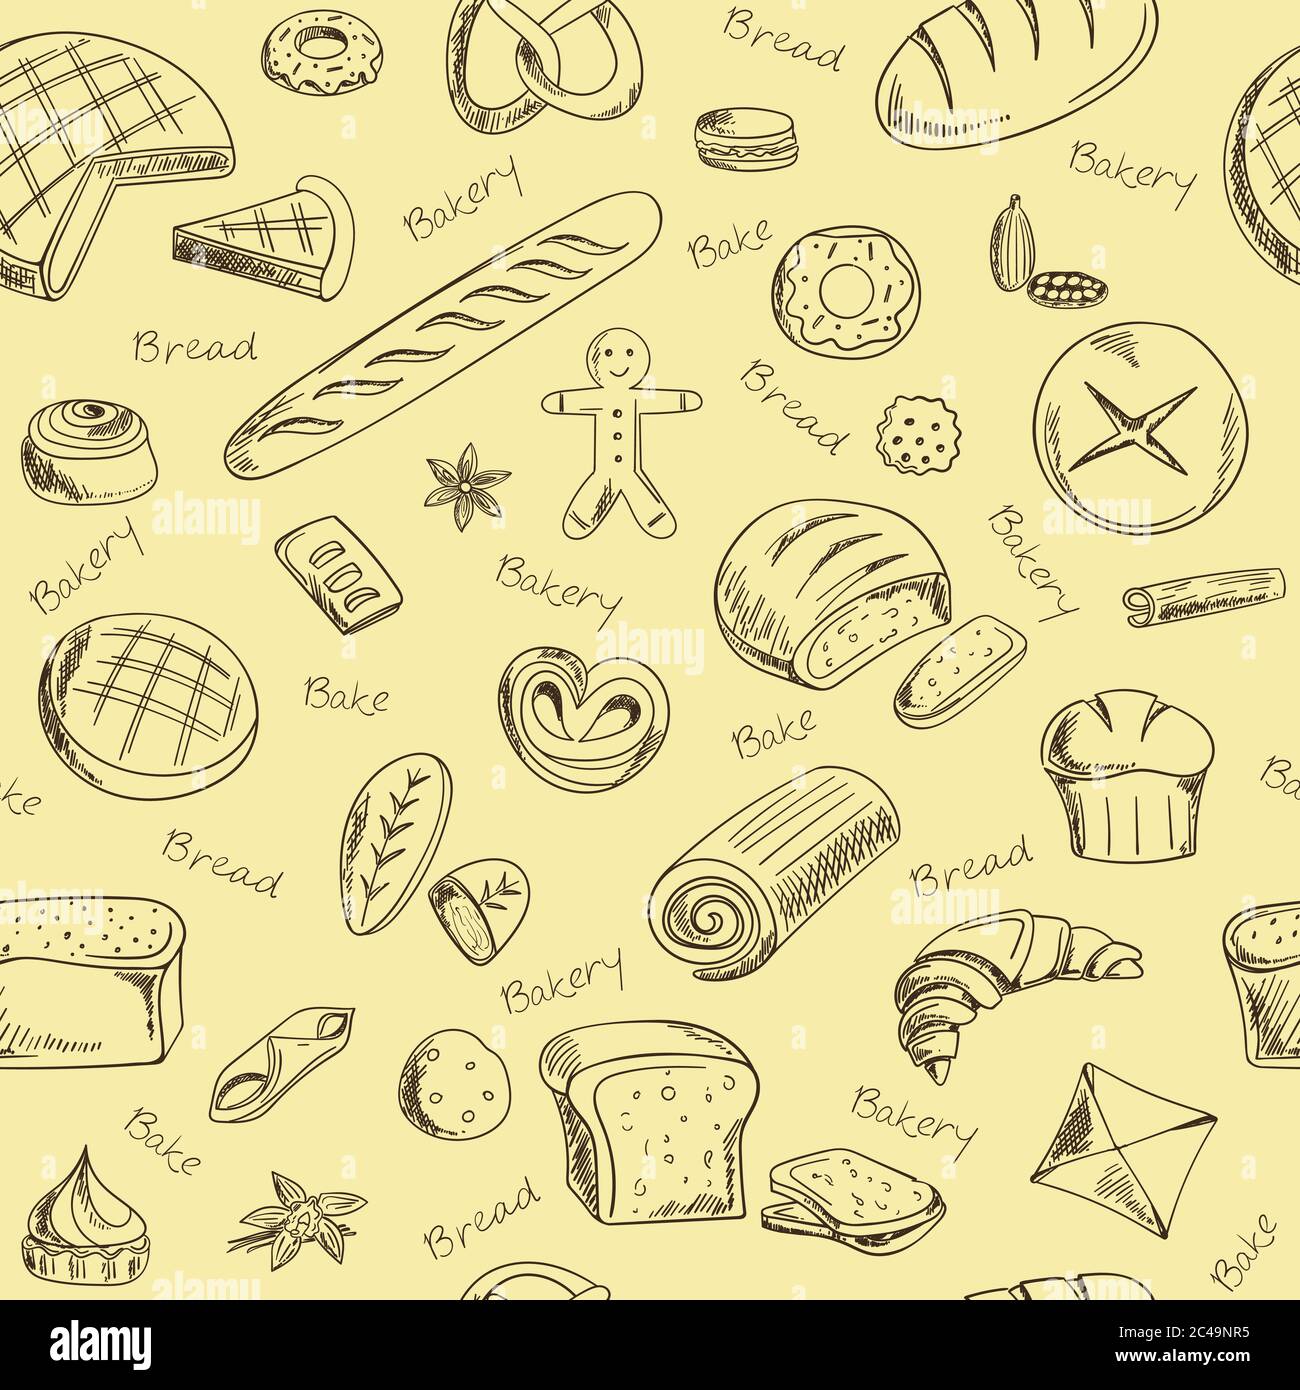 Hand drawn bakery doodles vector seamless pattern Stock Vector